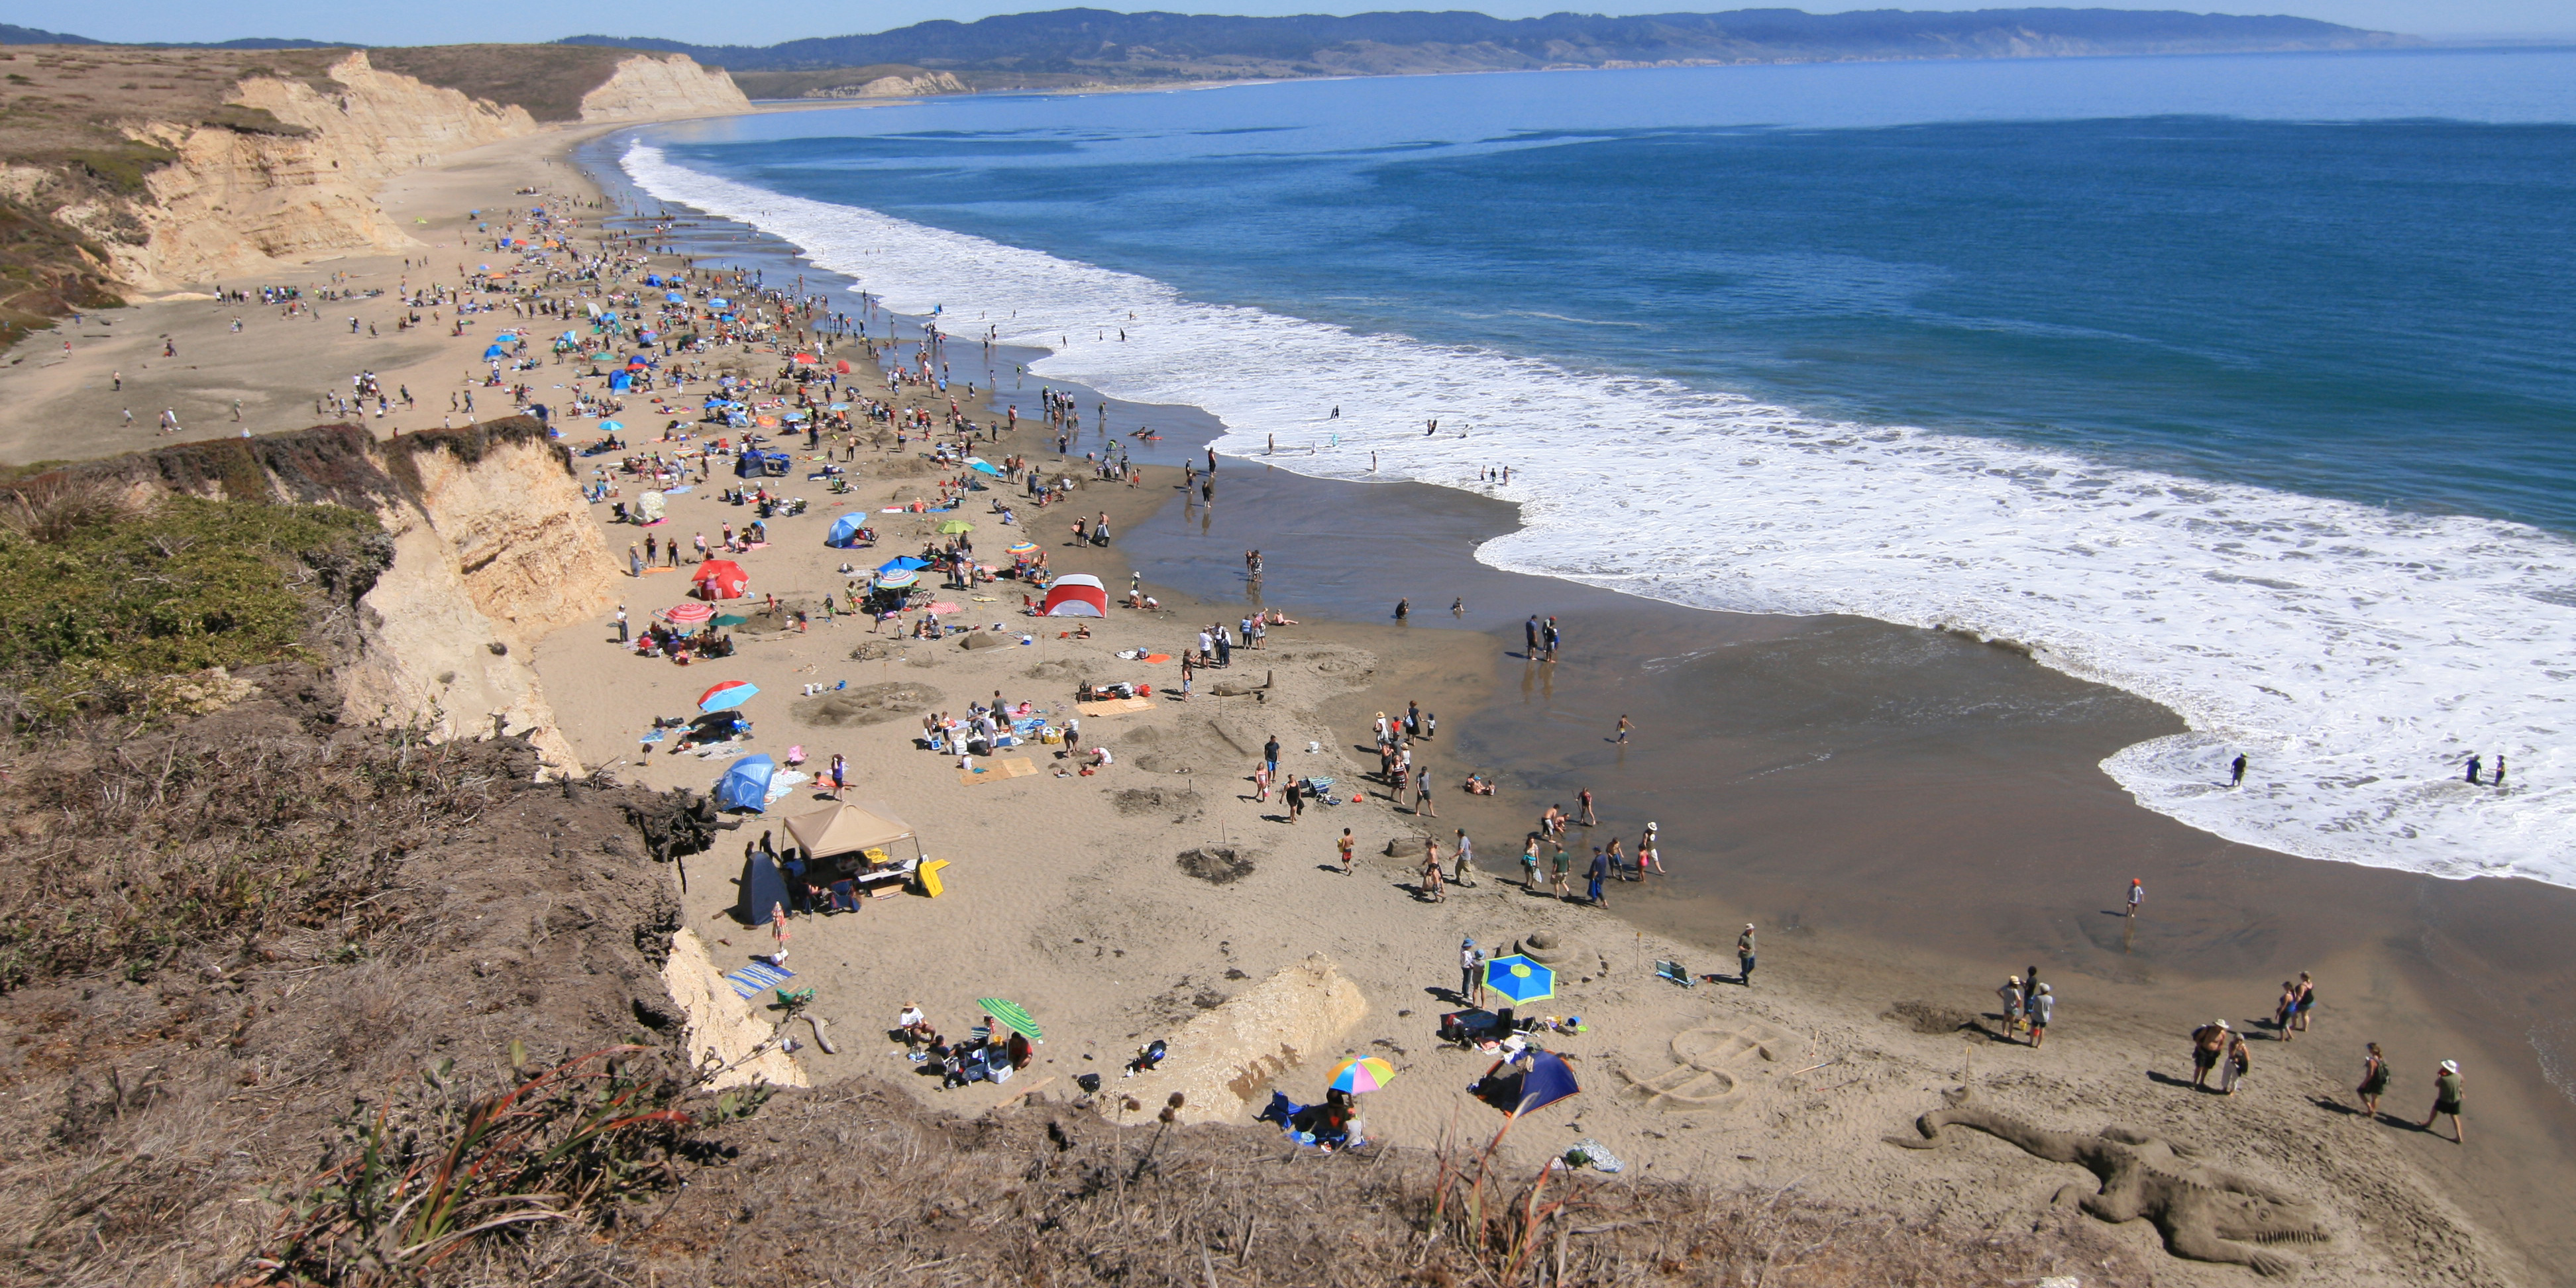 A photo from a bluff top looking down at a crowded beach on the left with a blue ocean bay on the right.